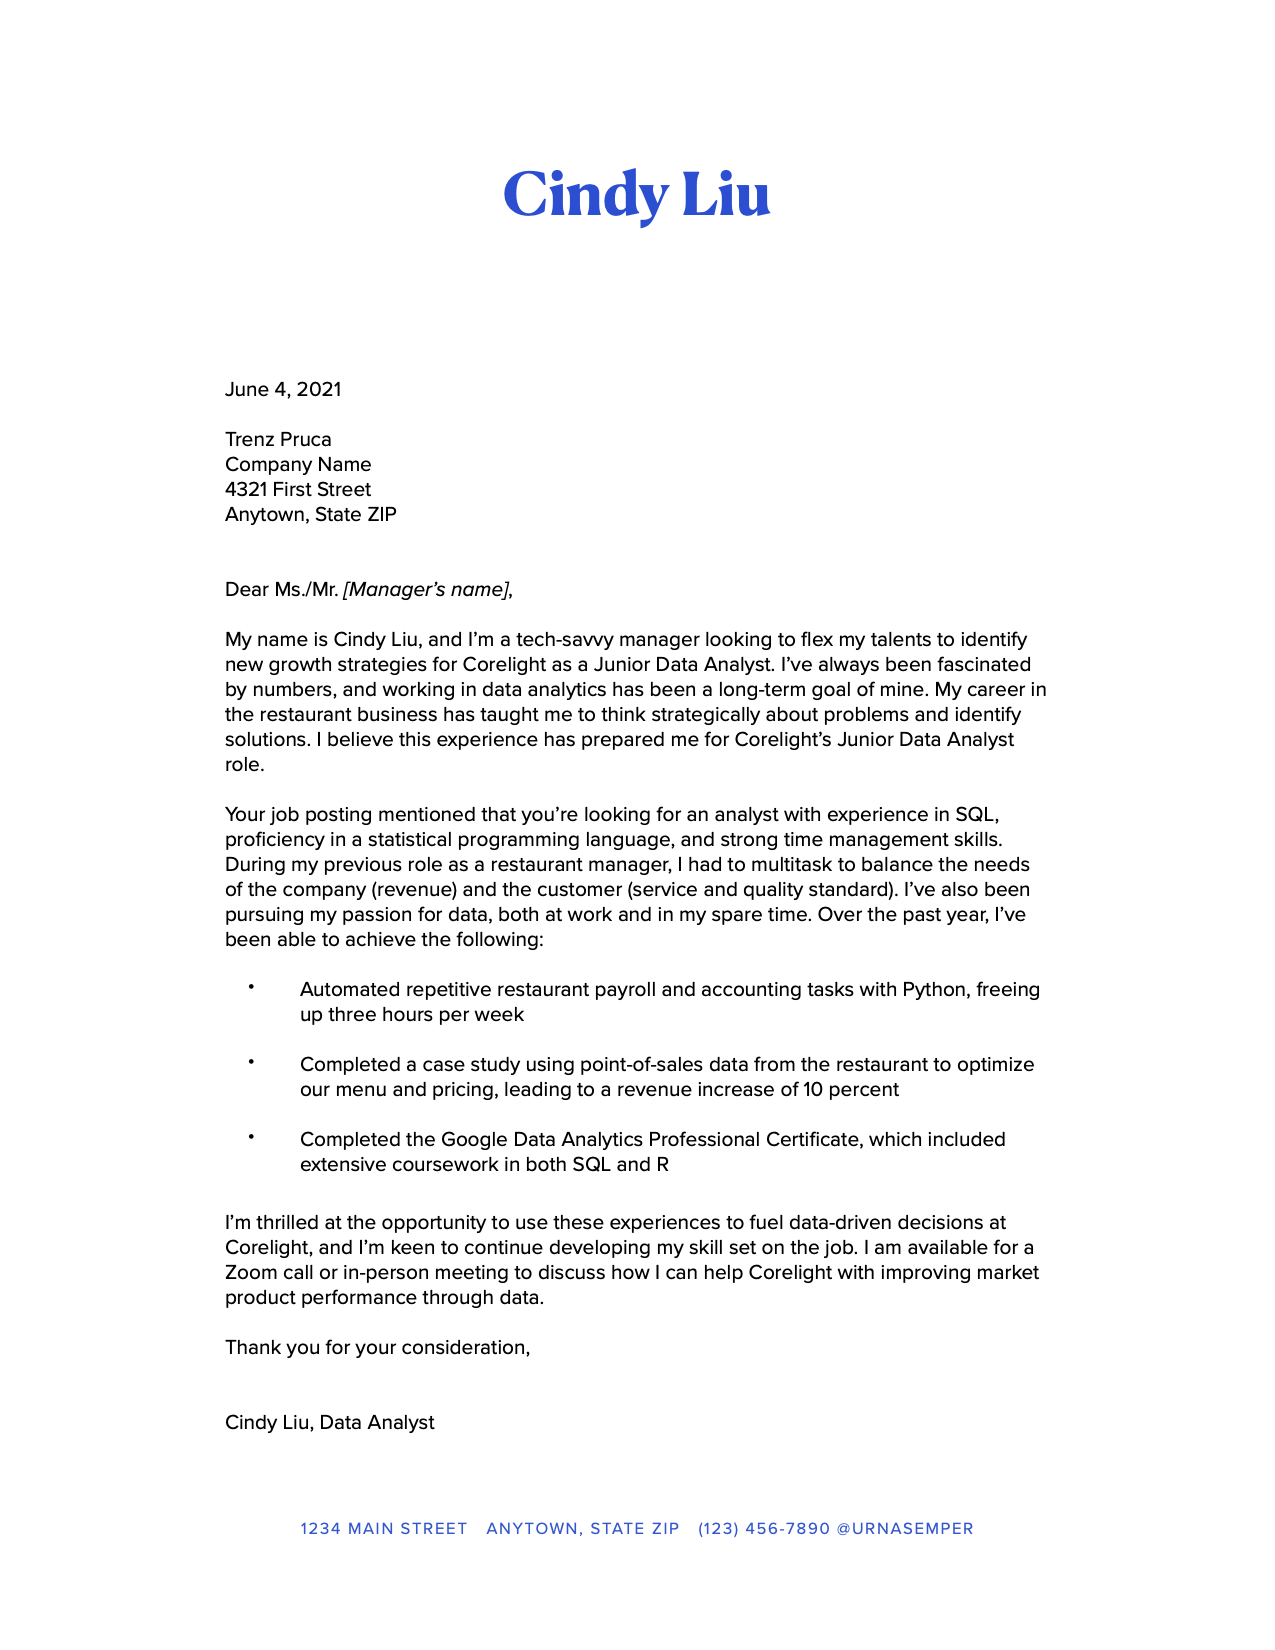 Sociable apodo inestable Data Analyst Cover Letter: 2022 Sample and Guide | Coursera